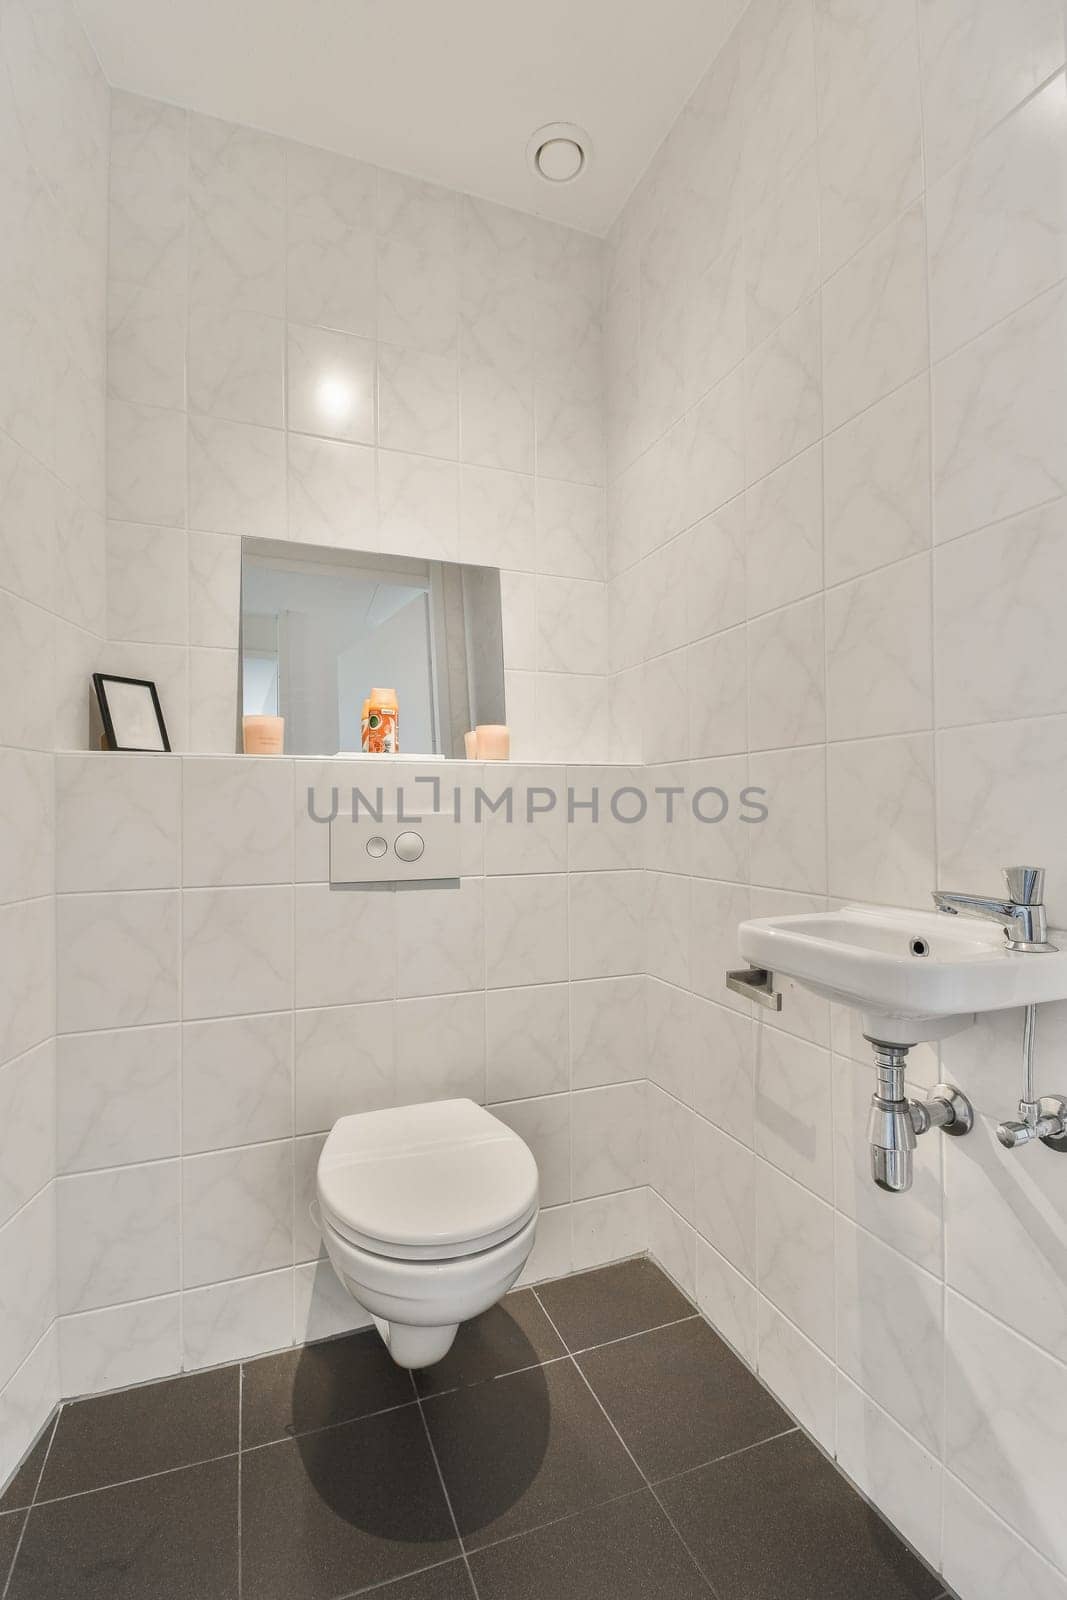 a white bathroom with black tile flooring and wall mounted mirror above the toilet bowl on the left is an image of a dog